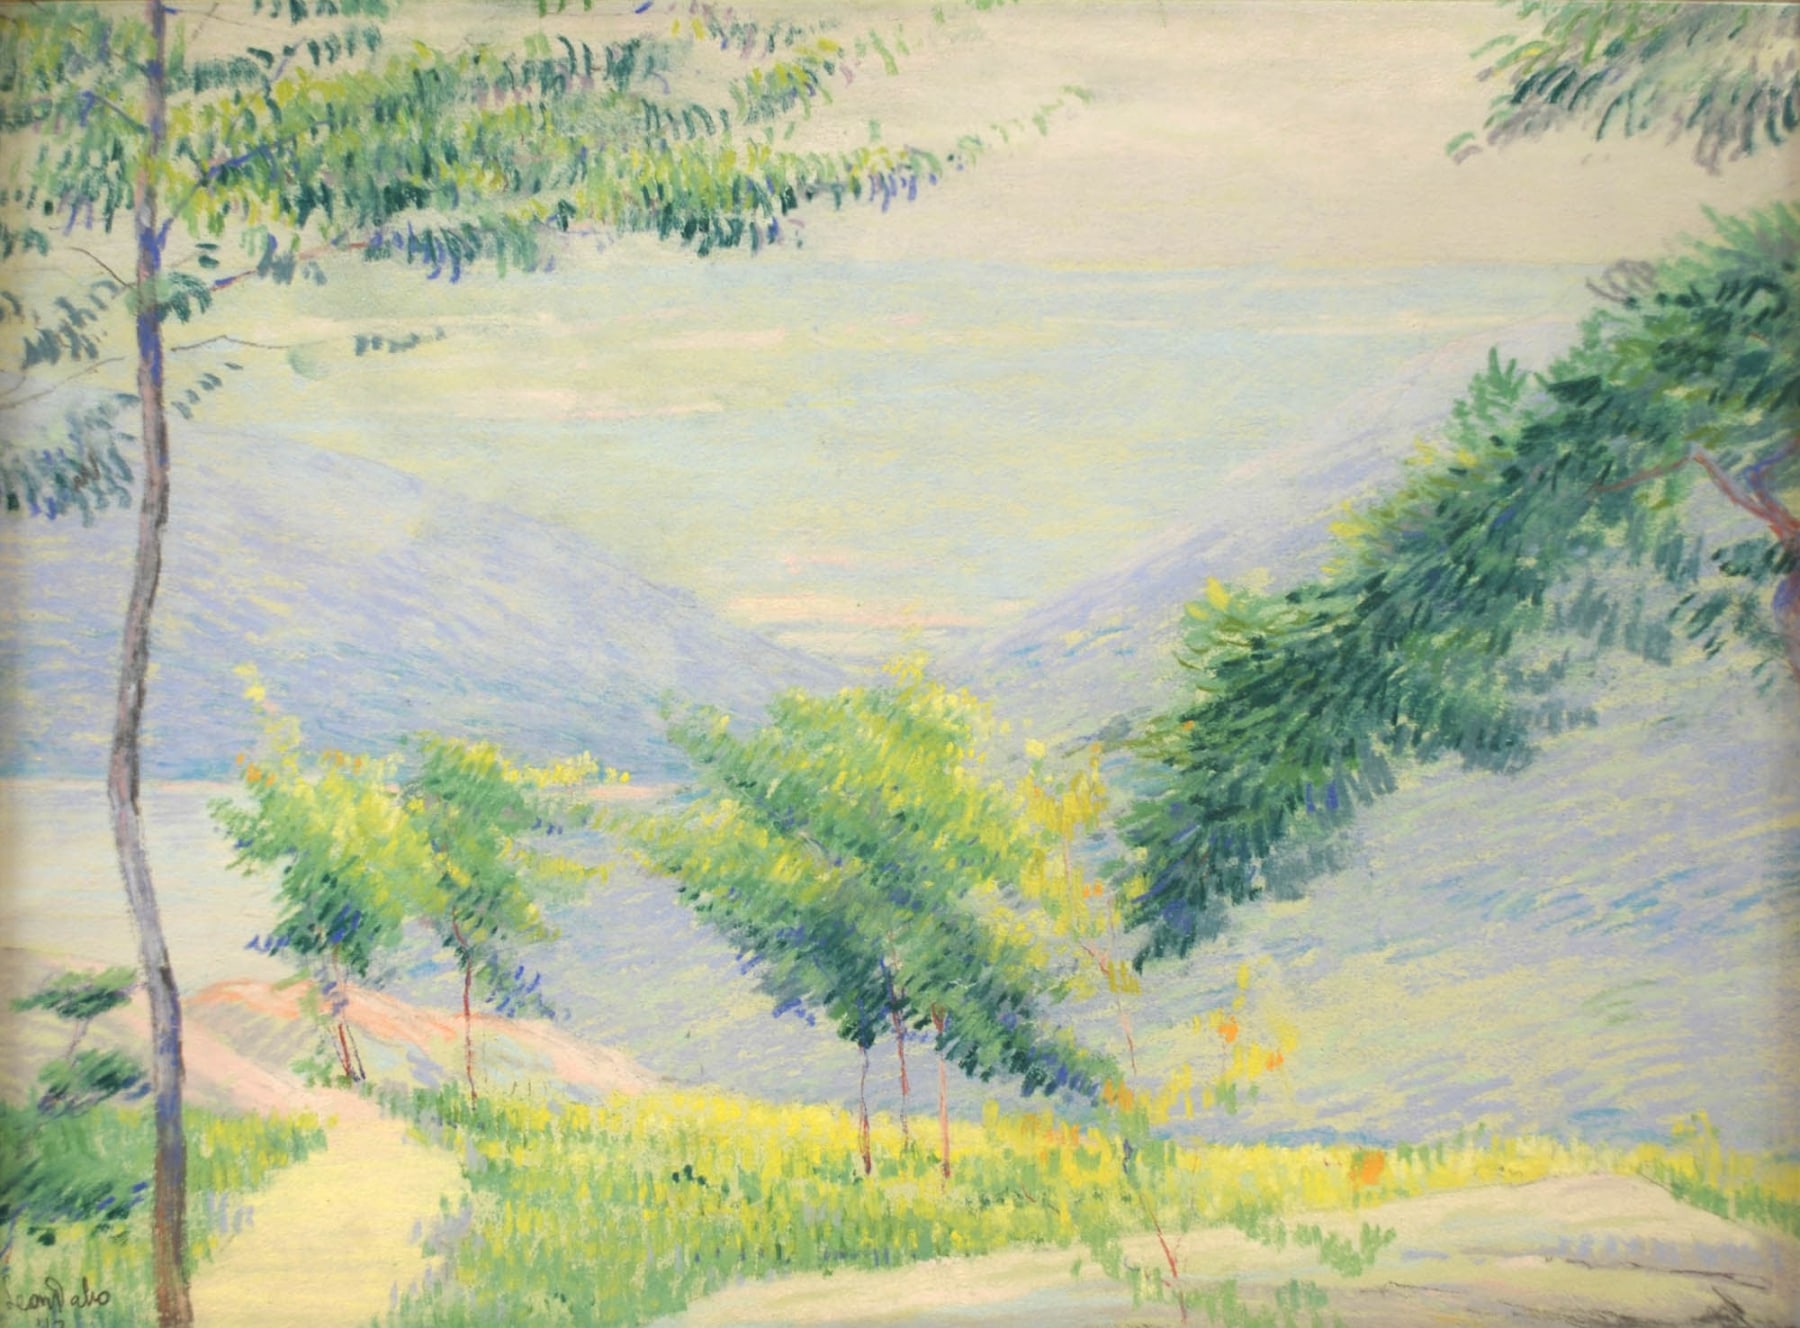 Leon Dabo, Valley View (possibly Road to Storm King from 4th Pastellists), 1913